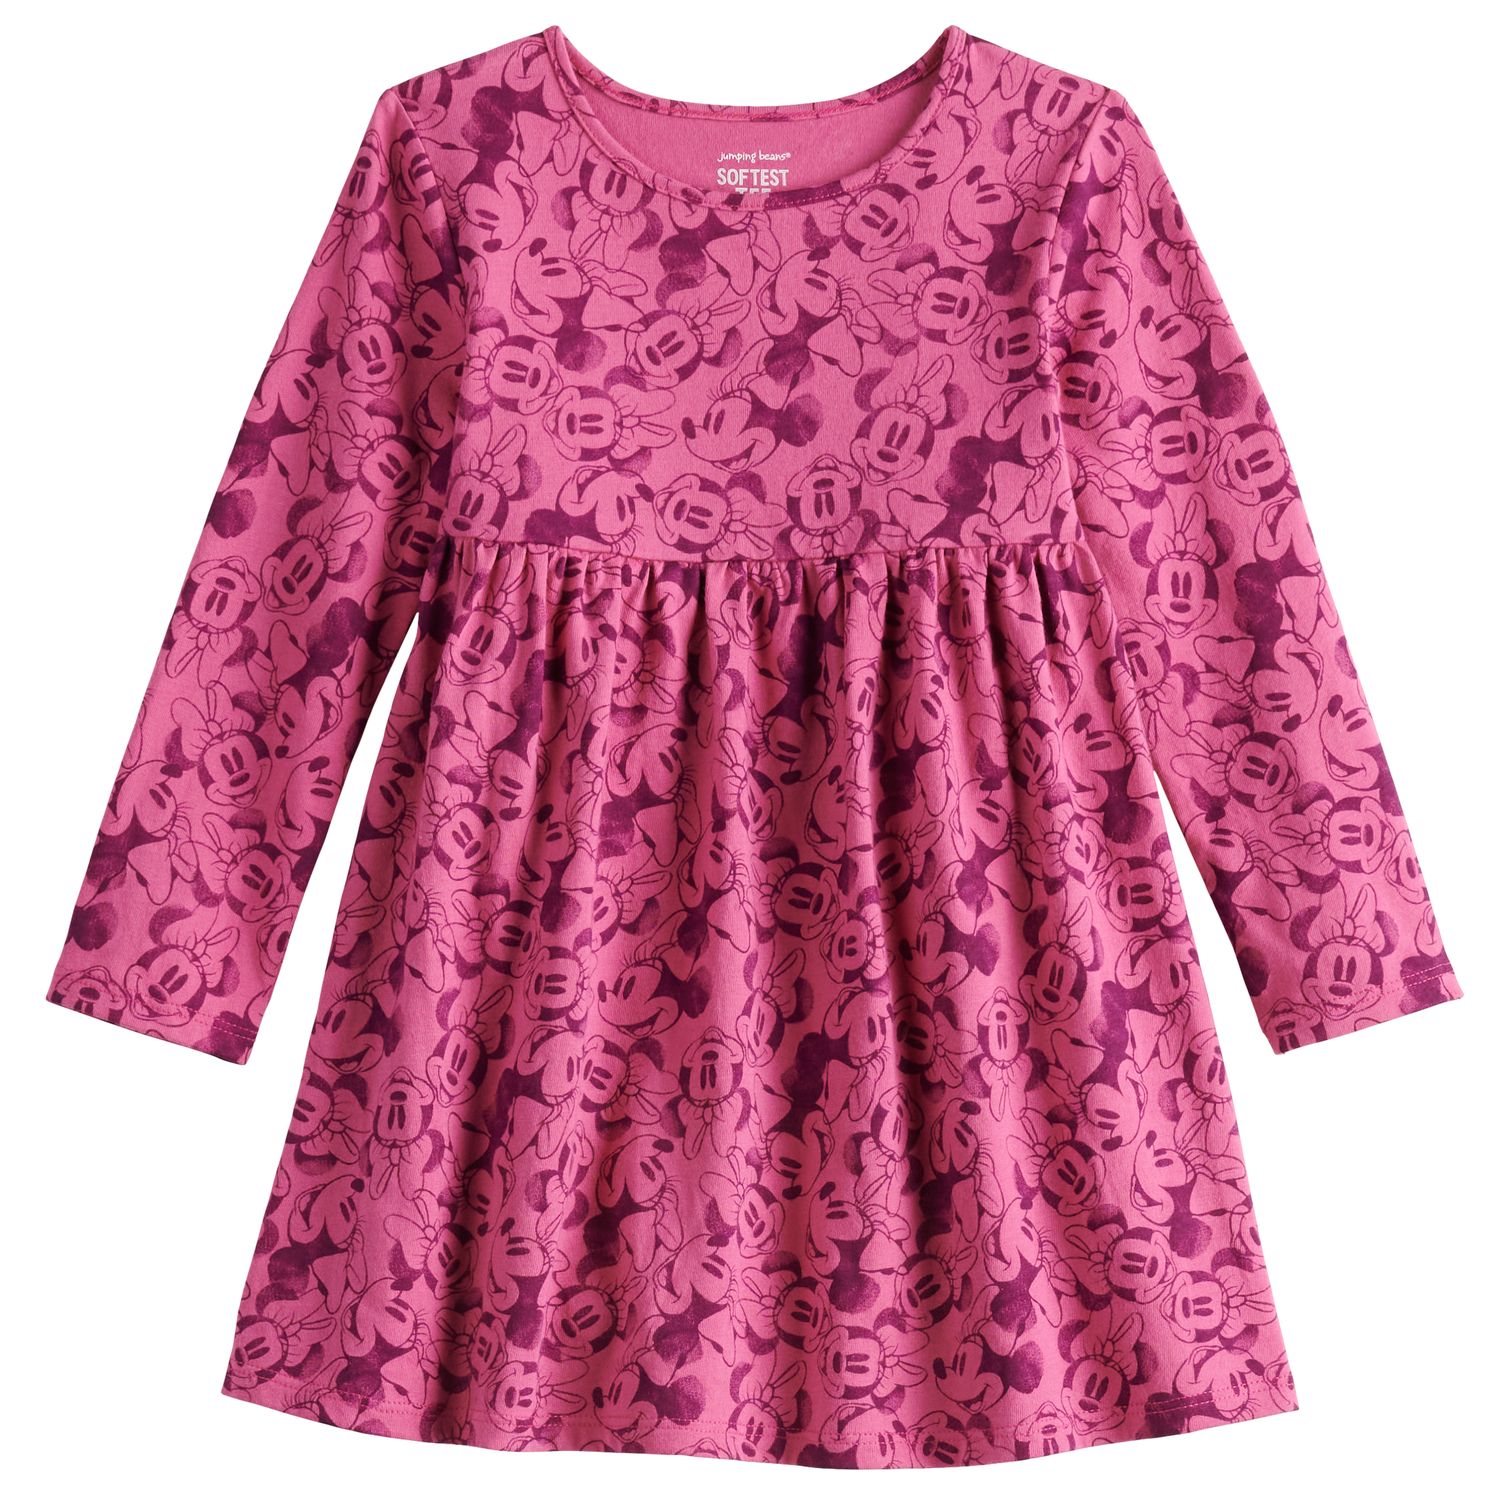 Image for Disney/Jumping Beans Disney's Minnie Mouse Toddler Girl Pink Long Sleeve Dress by Jumping Beans® at Kohl's.